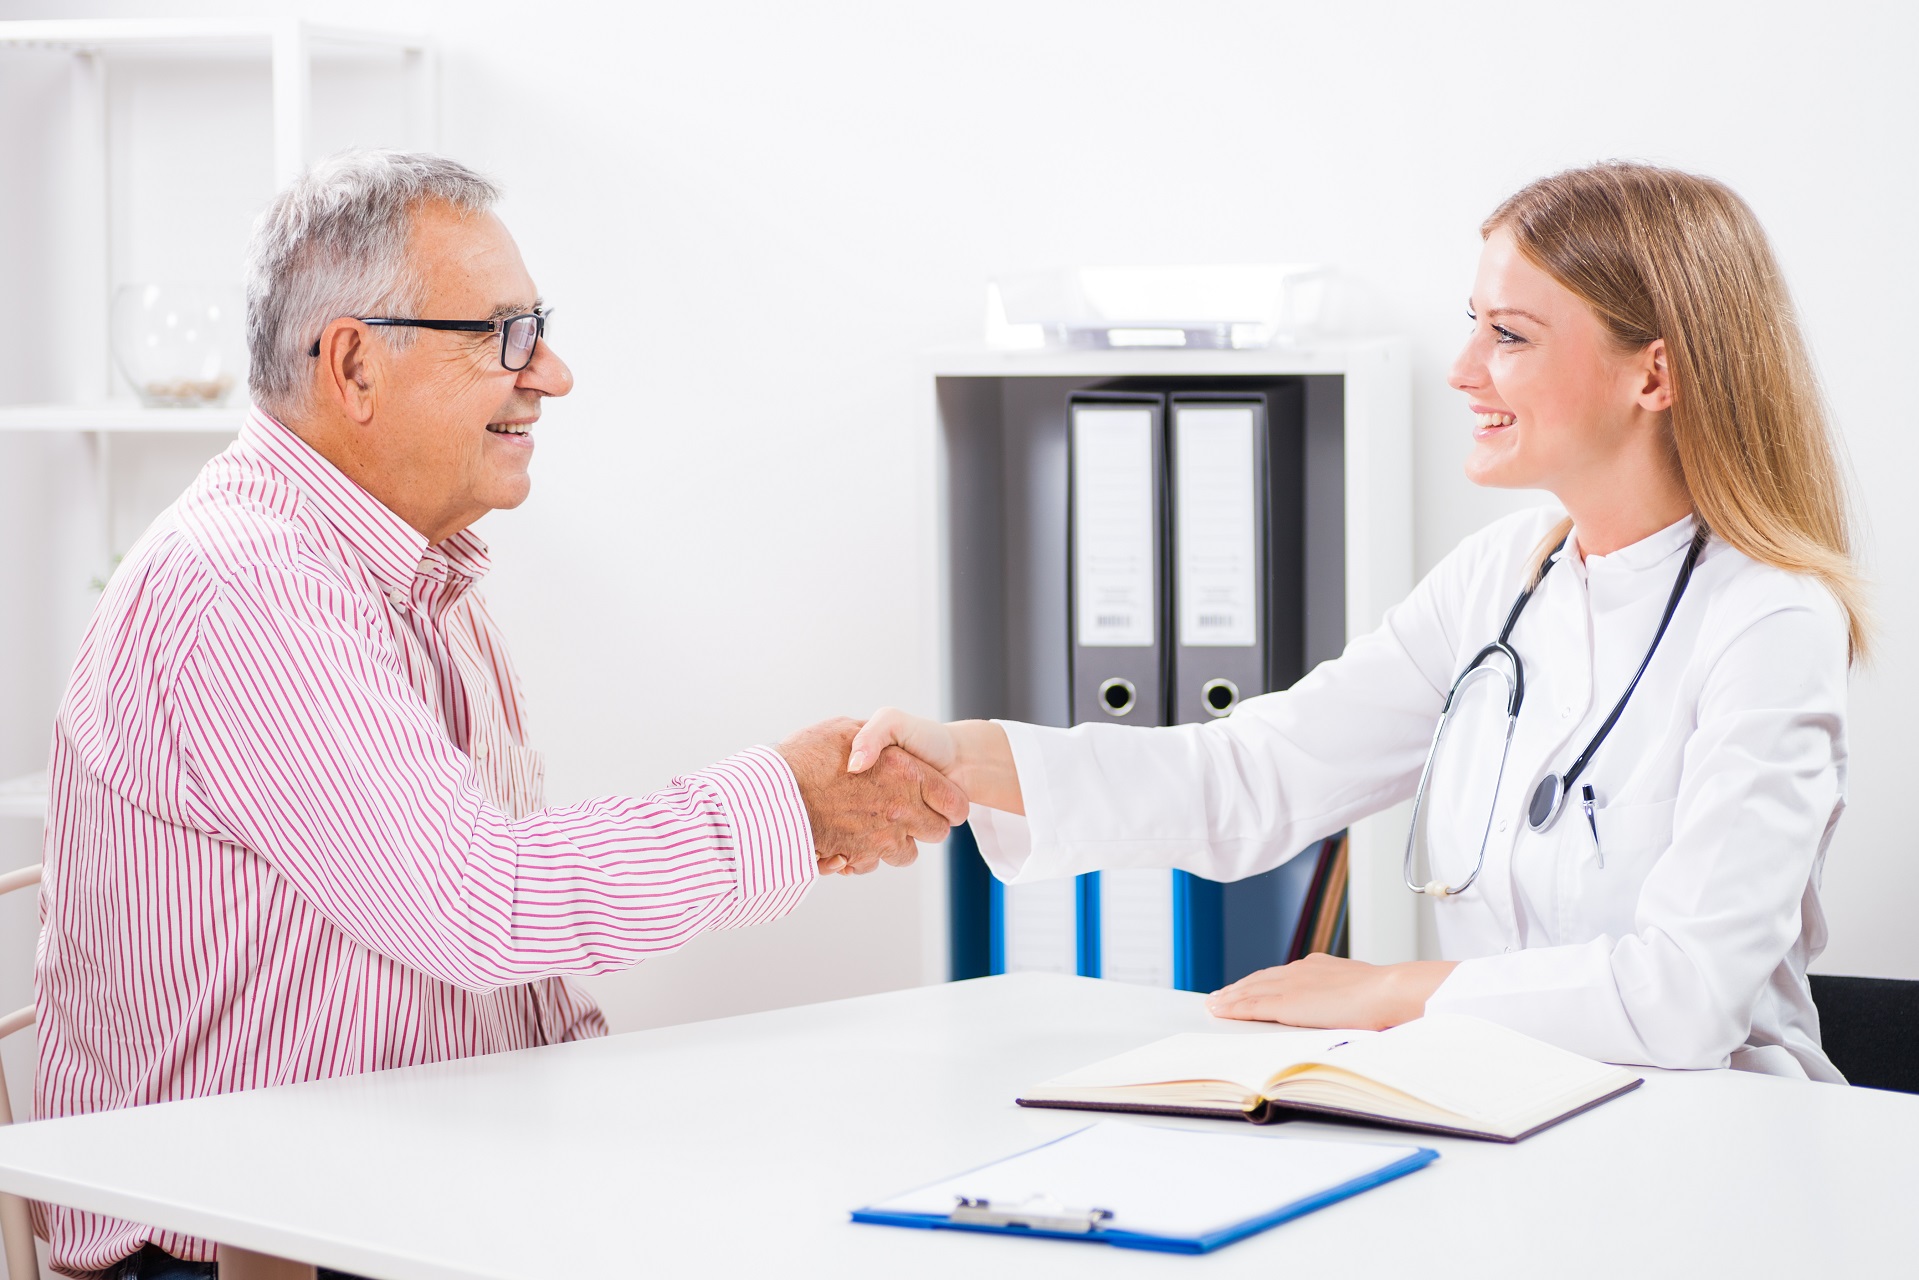 Managing Patient Expectations: What You Need To Know For Clinical Success